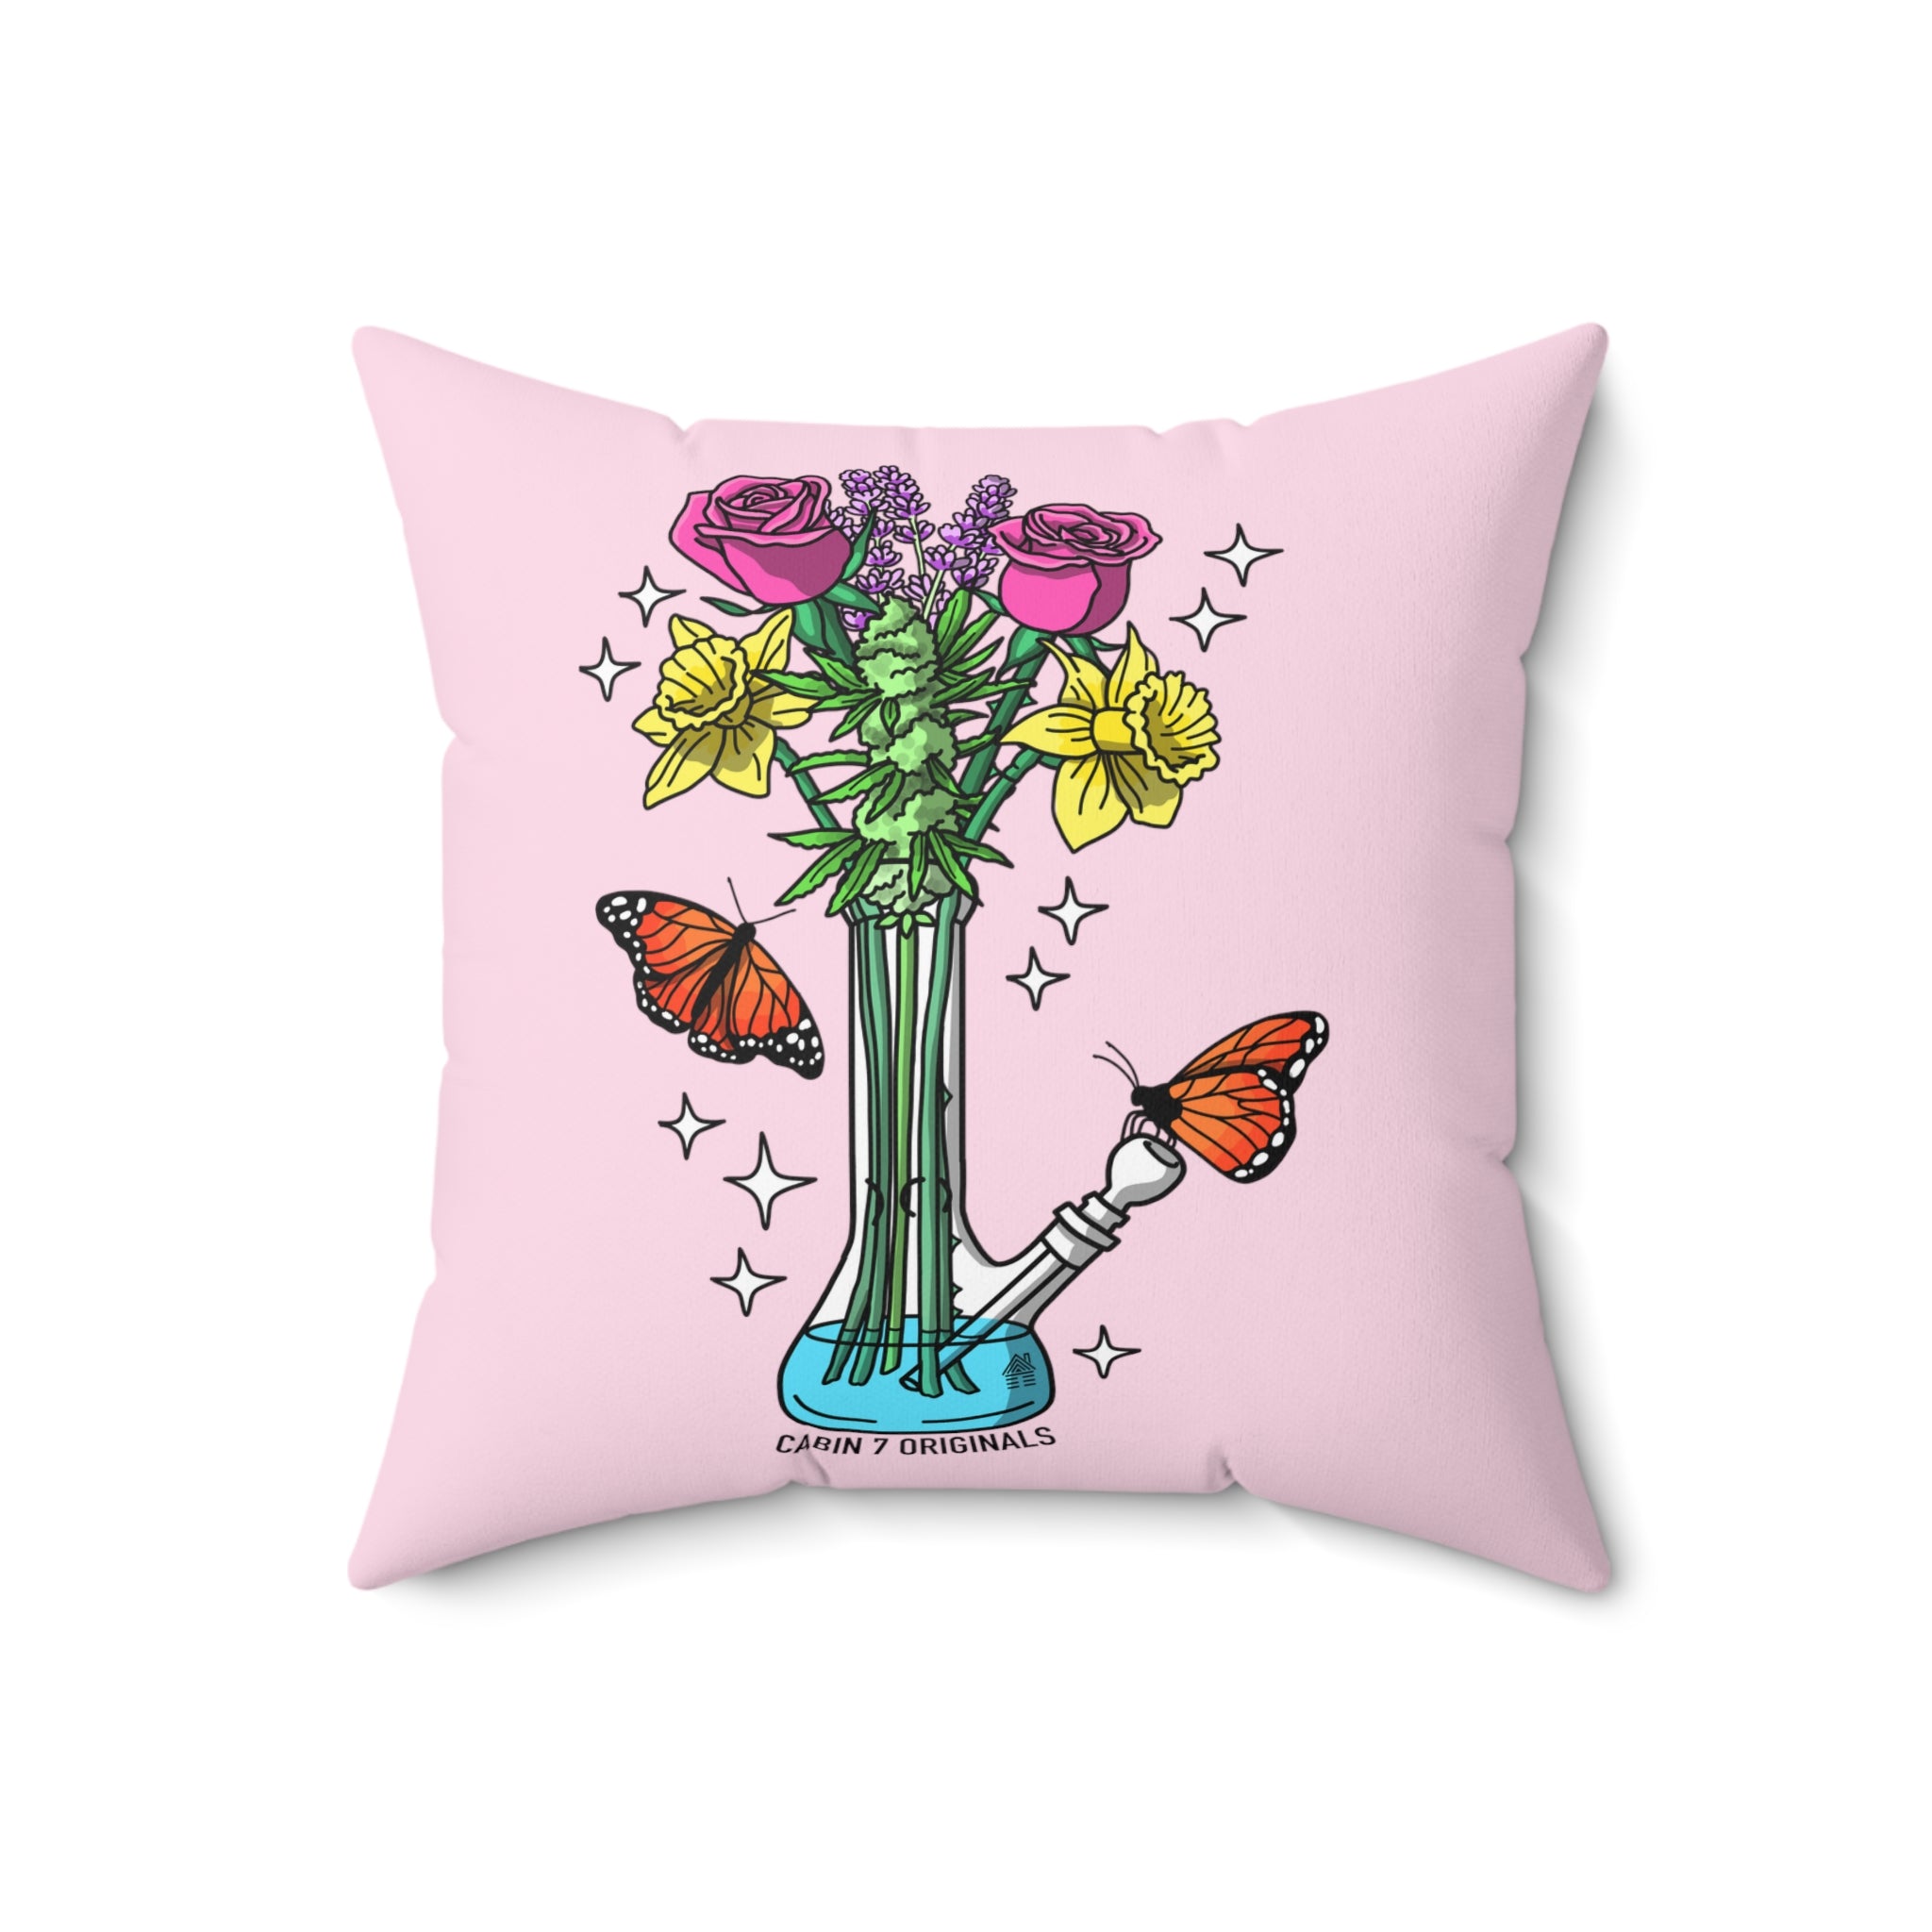 Bring Me Flowers Throw Pillow